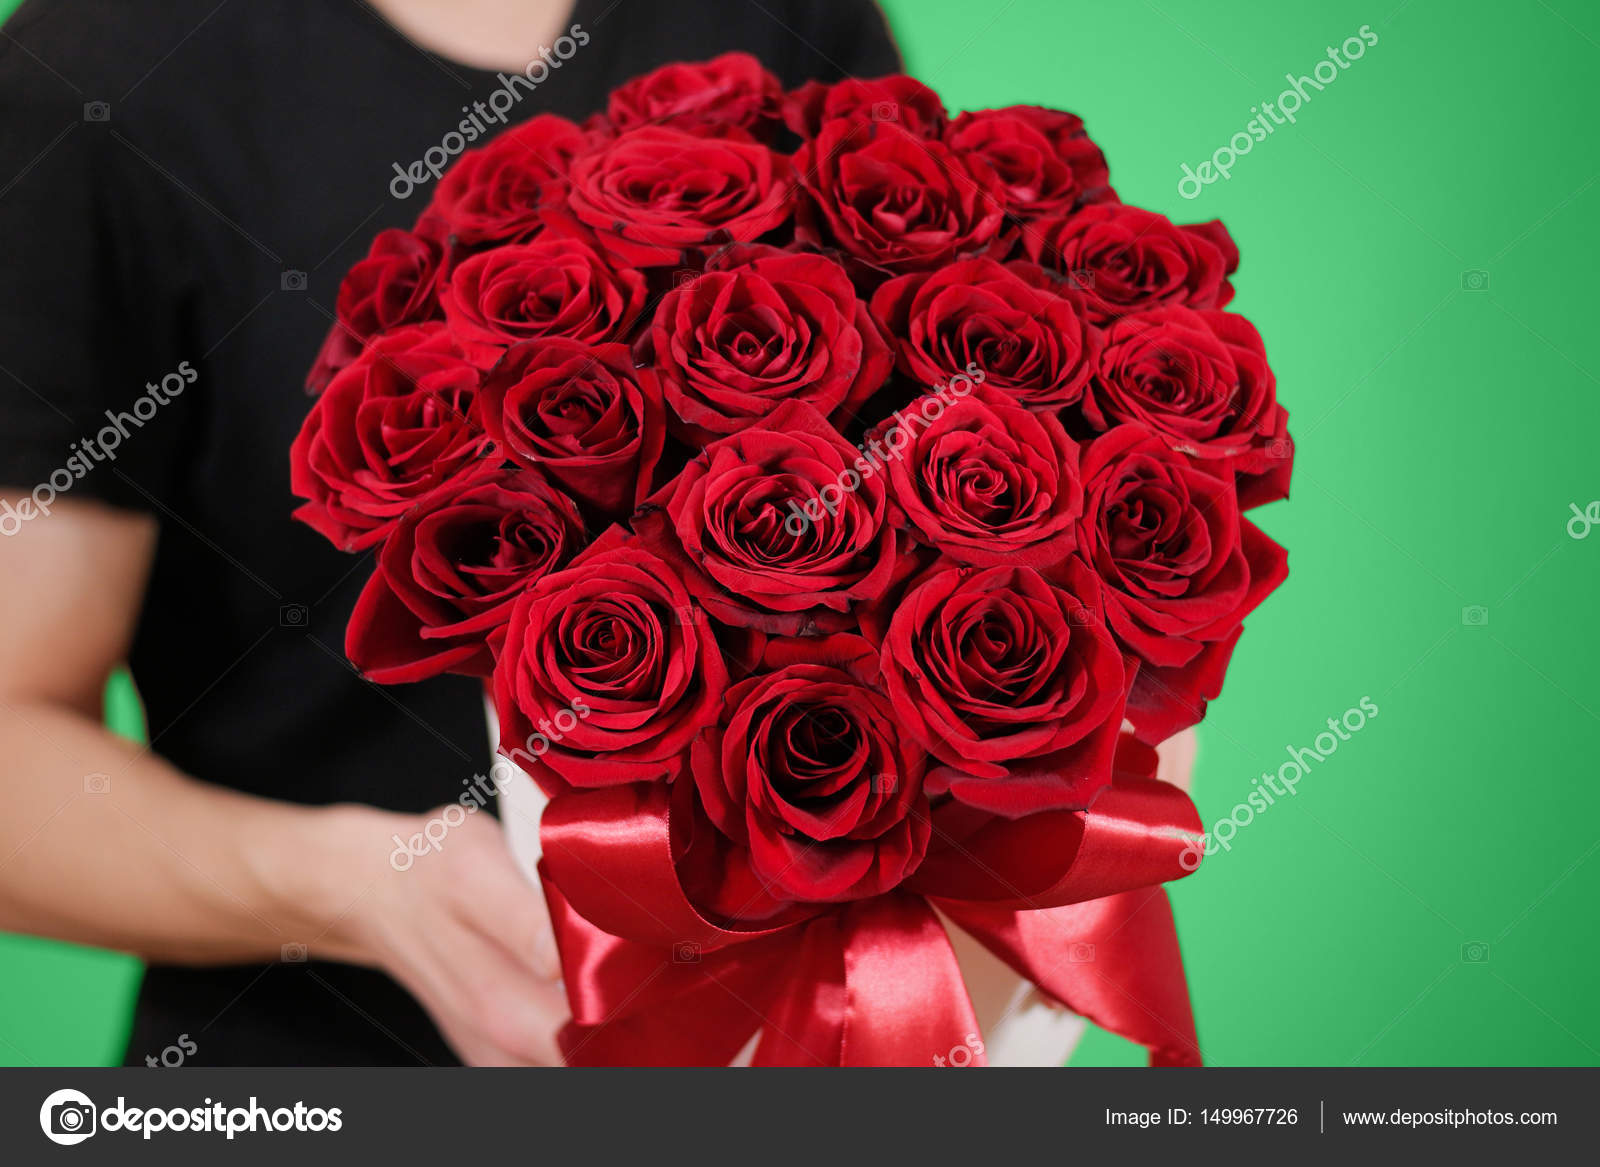 black t shirt with red roses